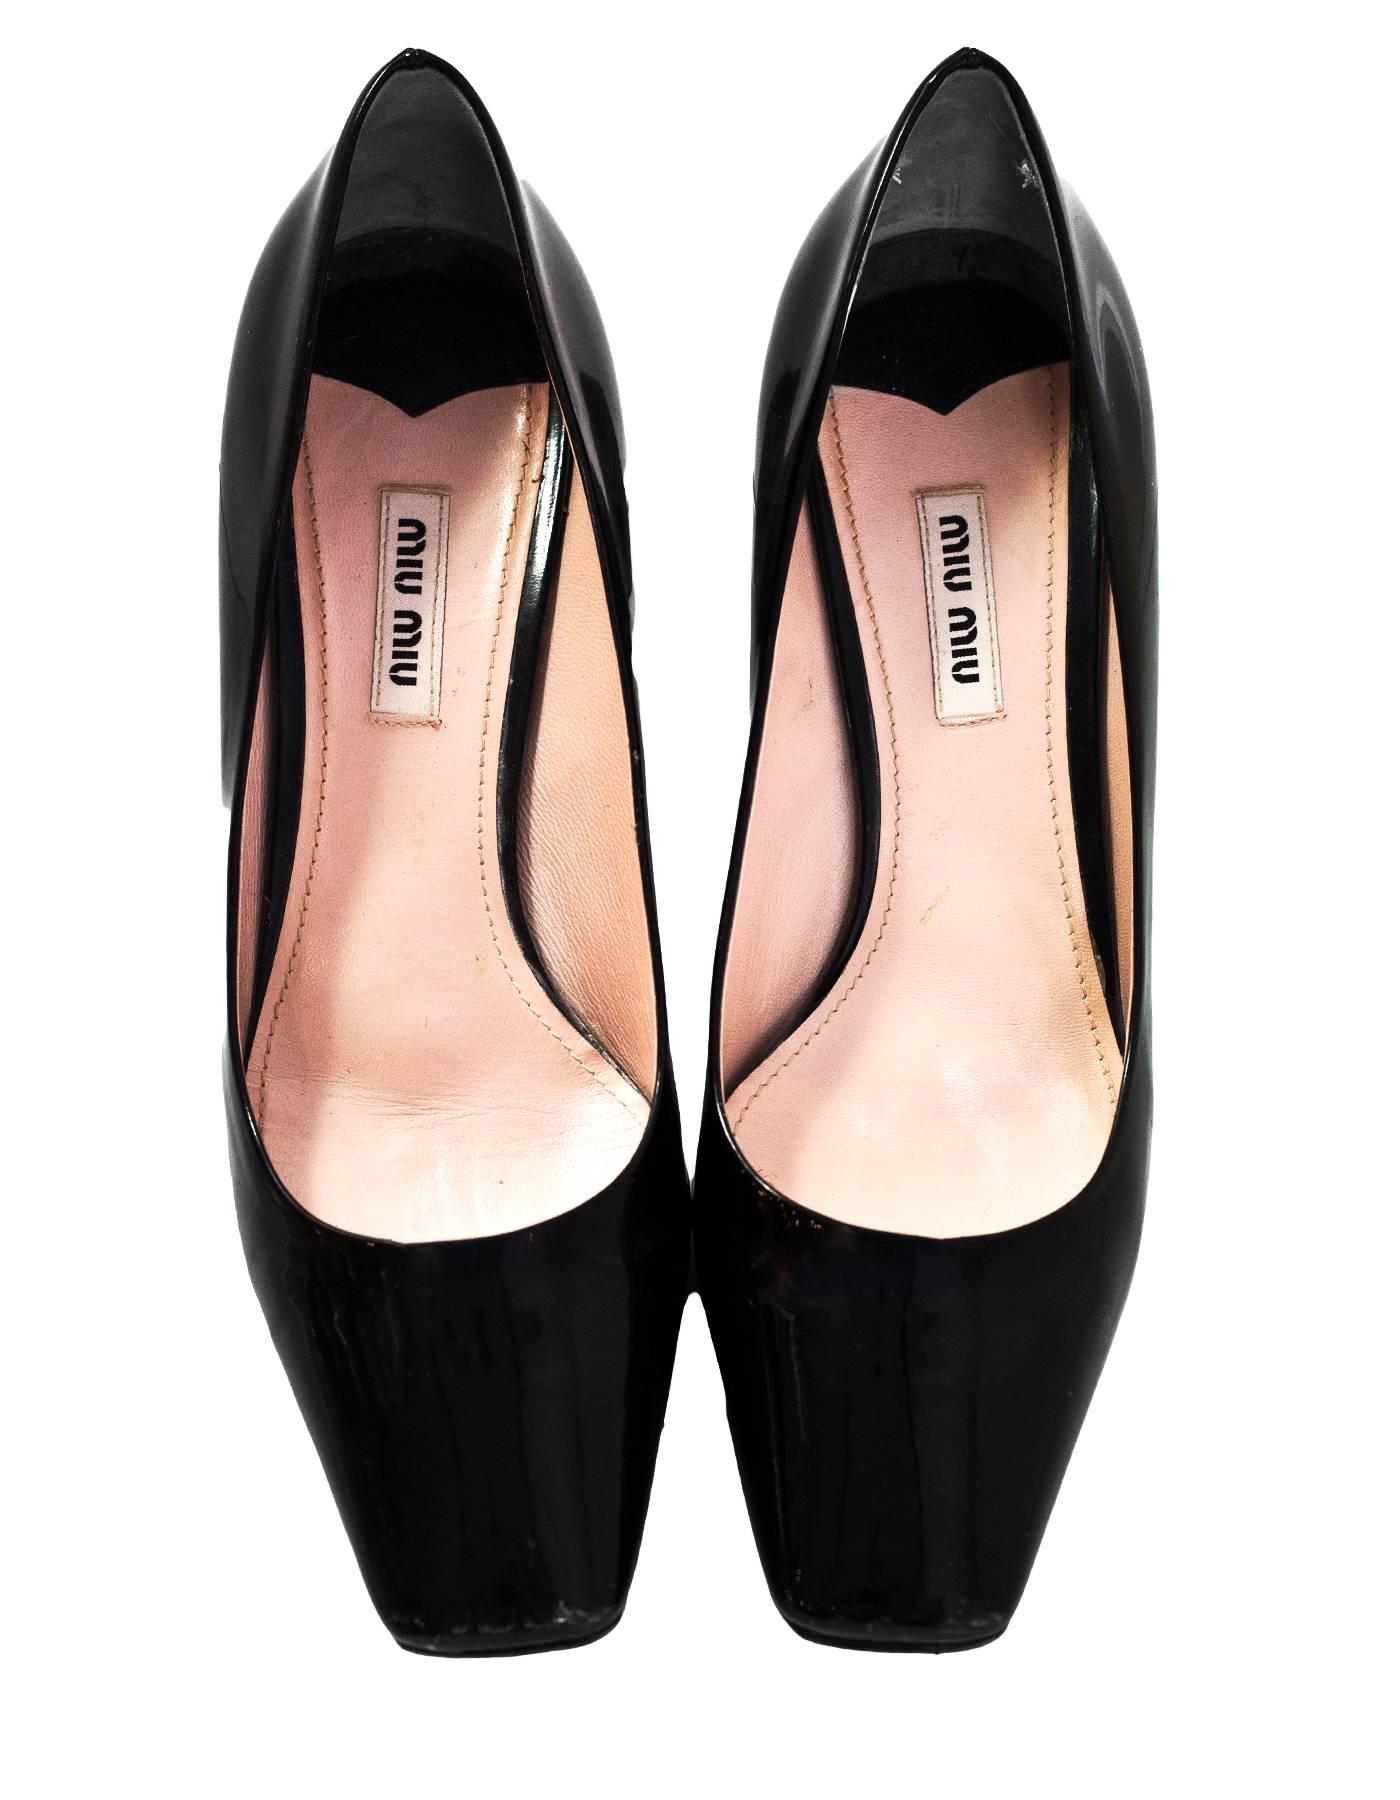 Miu Miu Black Patent Pumps with Crystal Heels Sz 39.5 In Excellent Condition In New York, NY